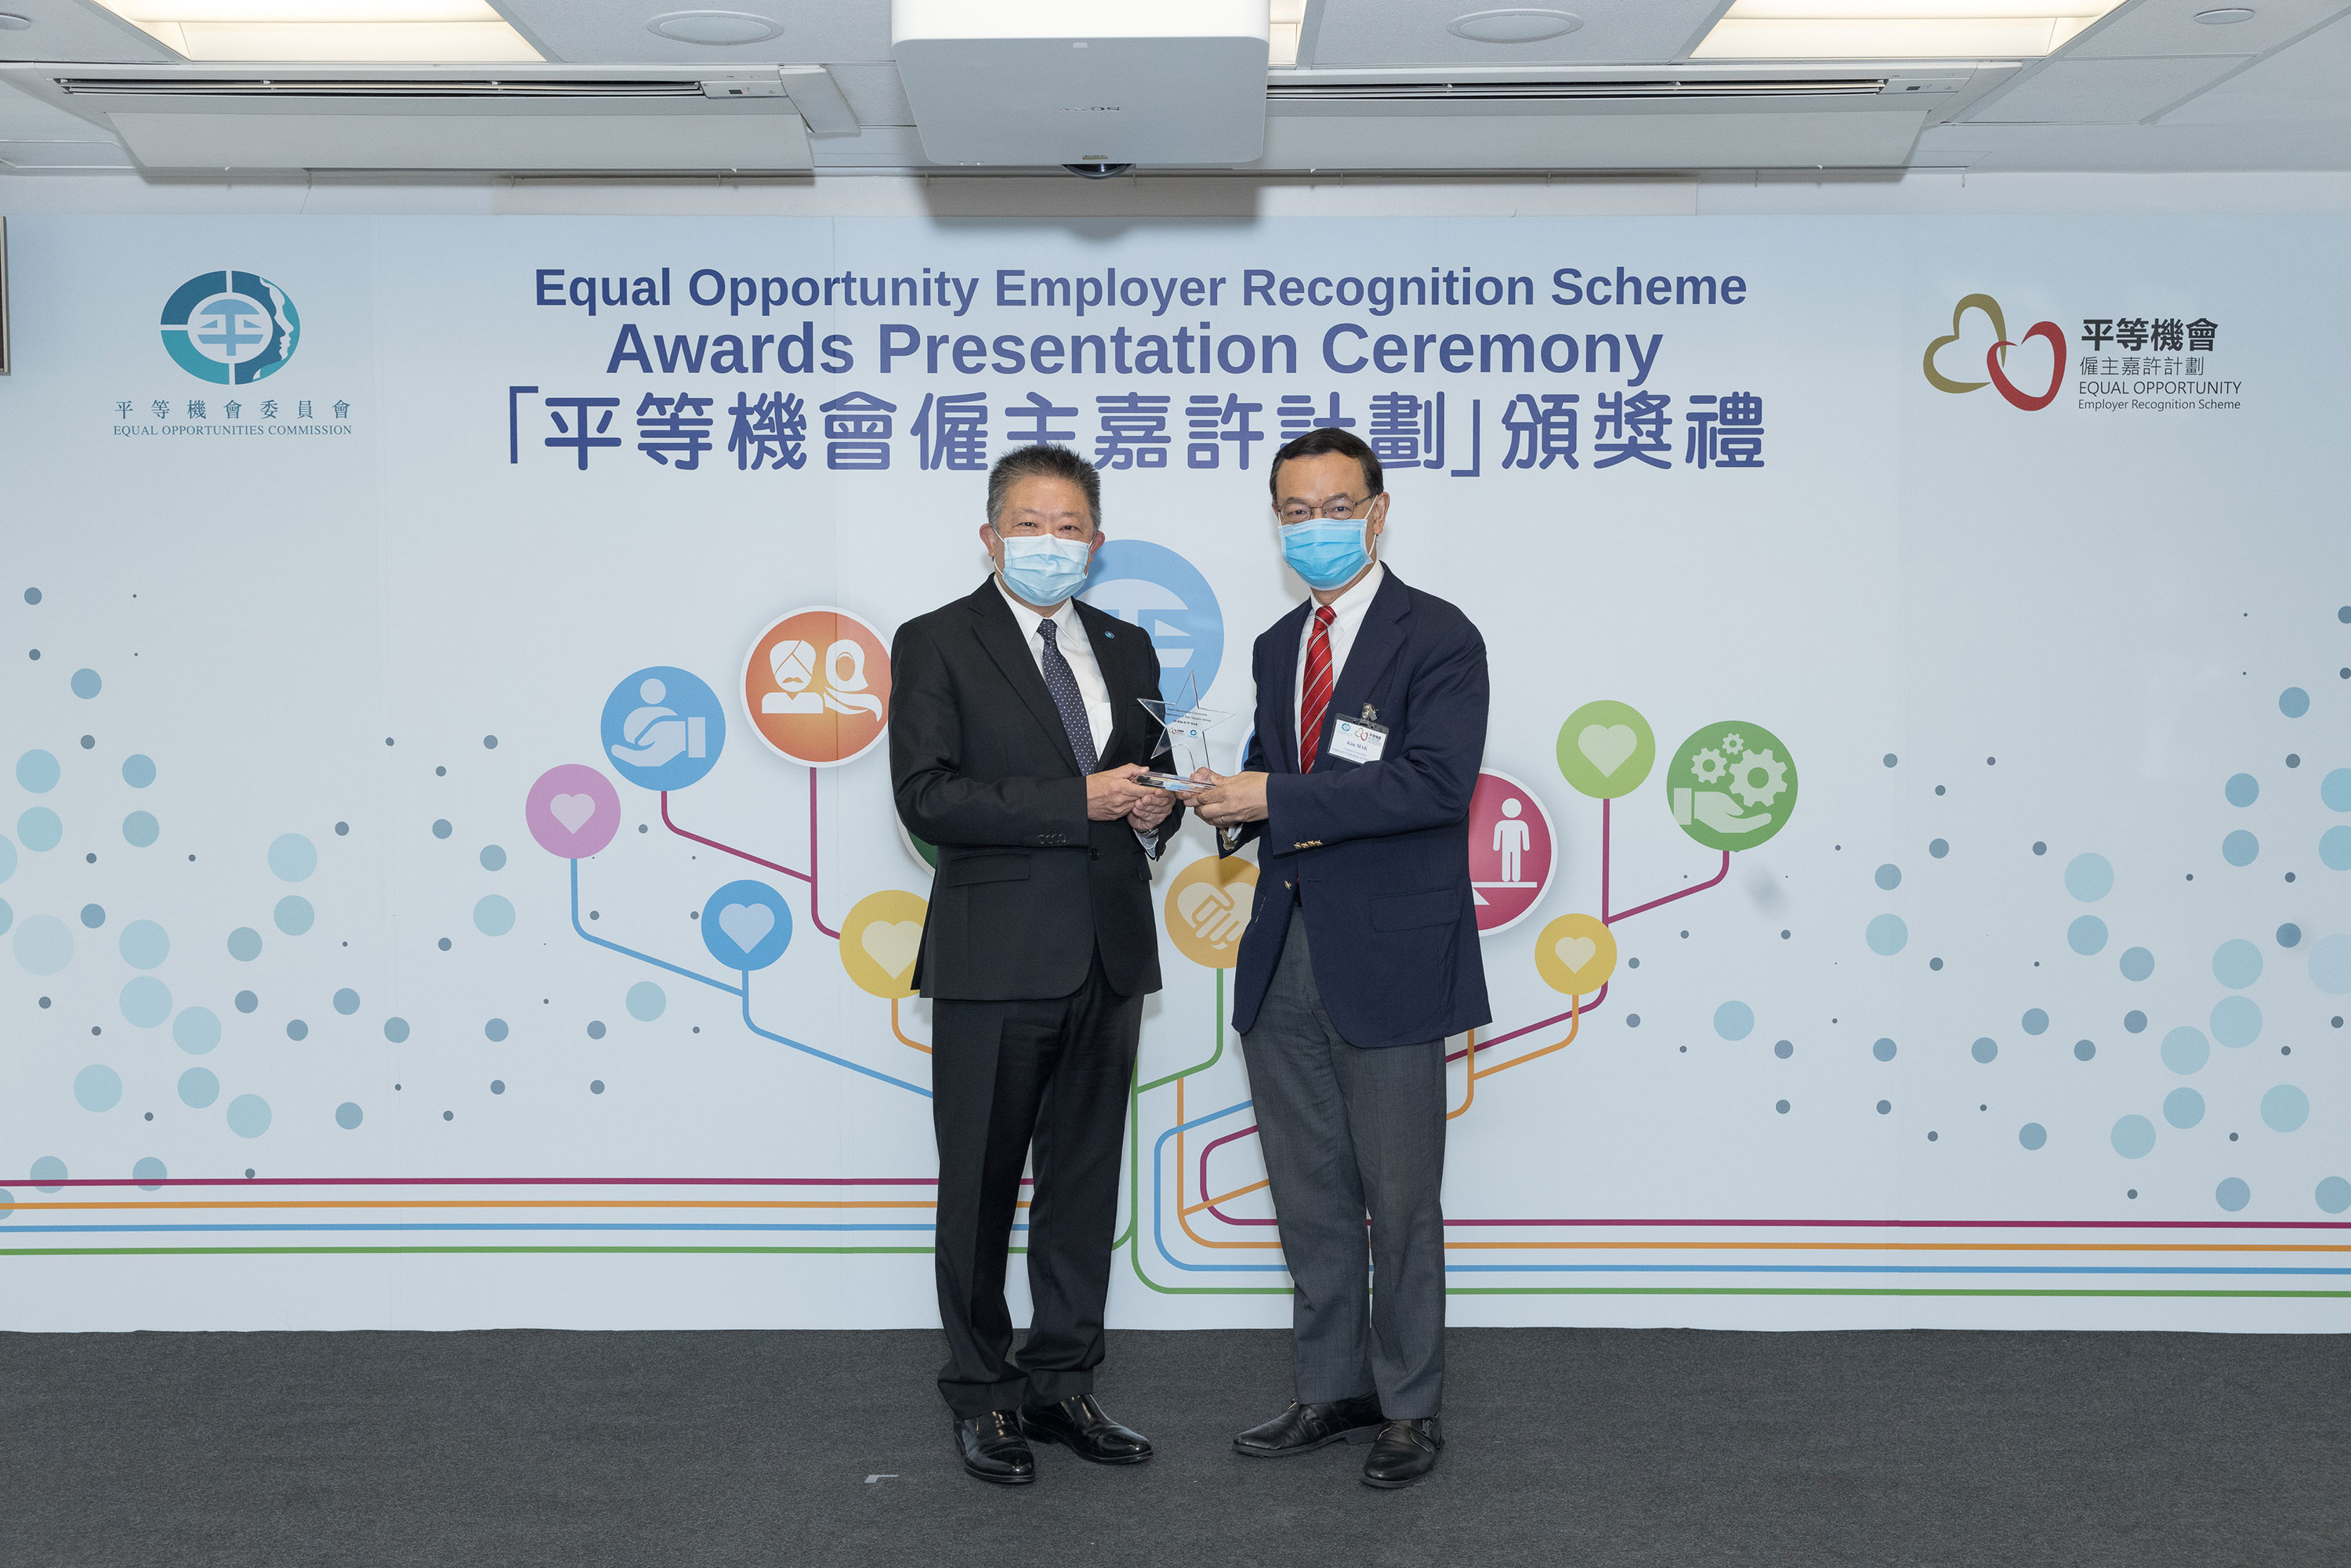 Mr Ricky CHU Man-kin, IDS, Chairperson of the Equal Opportunities Commission (left) presents souvenir to member of the General Committee of the Employers’ Federation of Hong Kong, Dr Kim MAK (right), who served as member of the assessment panel of the Equal Opportunity Employer Recognition Scheme.